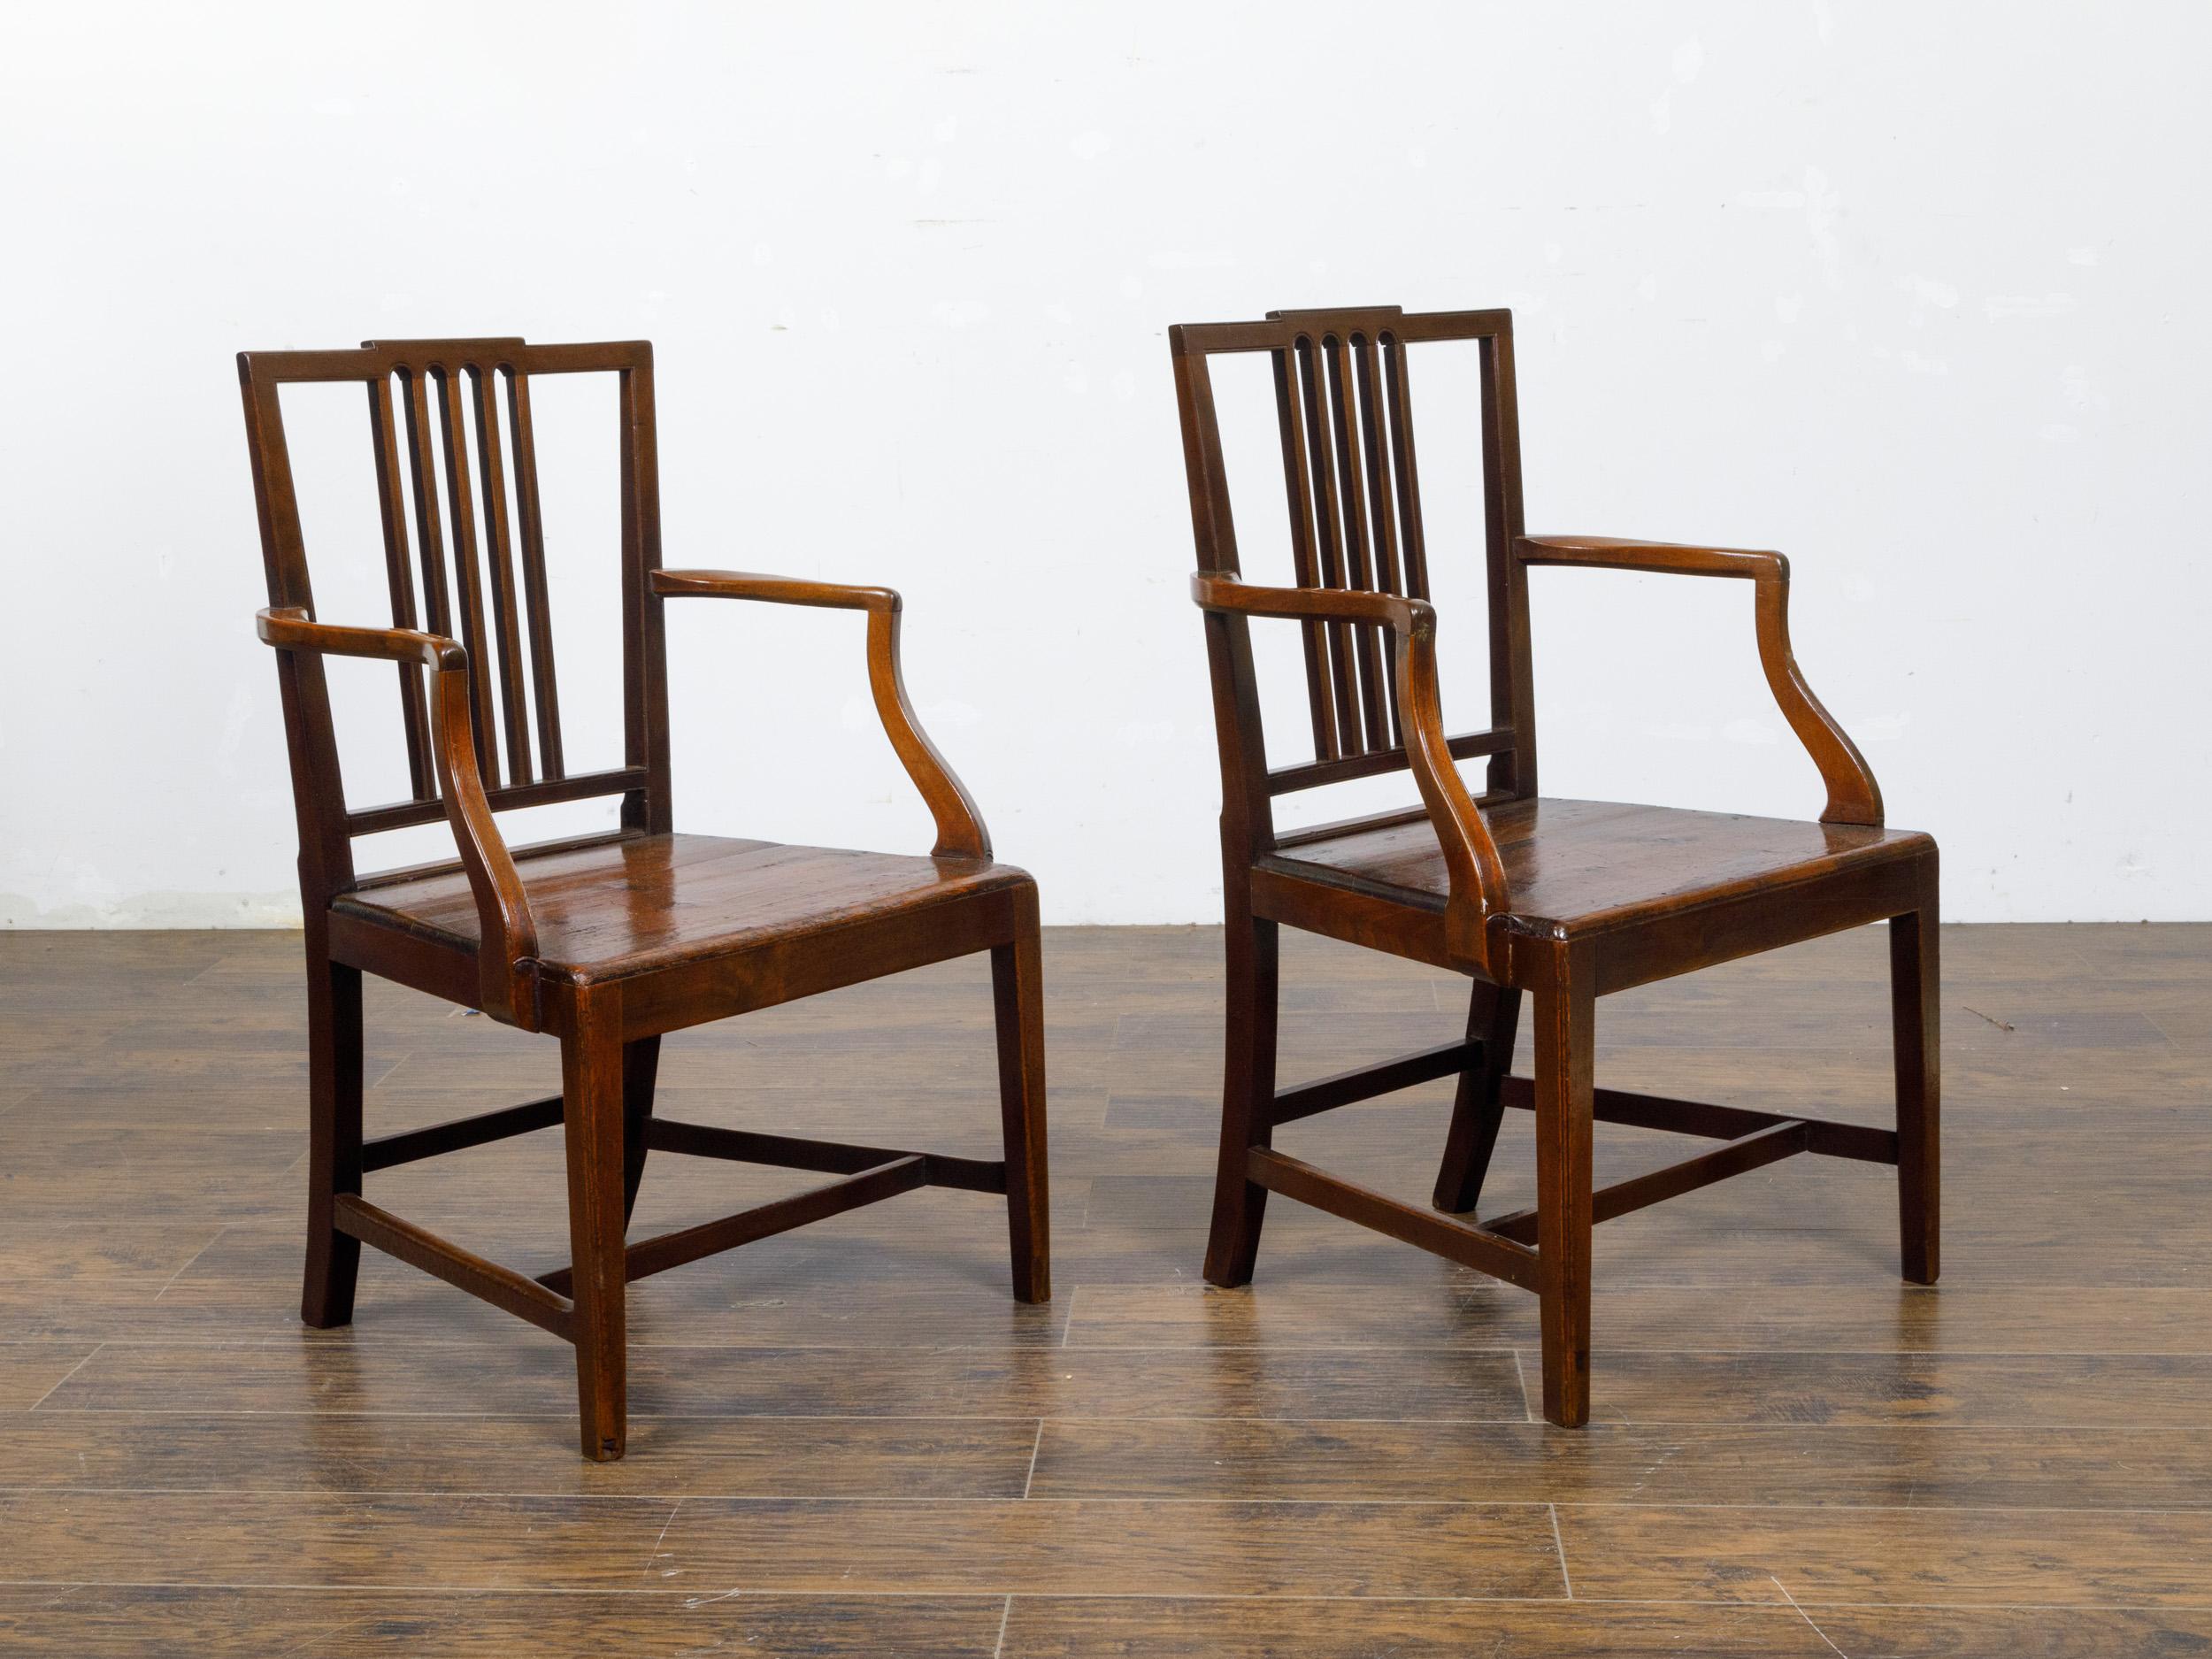 A pair of English George III period plank seat chairs from circa 1800 with pierced backs, slightly scrolling arms, straight legs and cross stretchers. This pair of George III period chairs hails from early 19th-century England, showcasing the